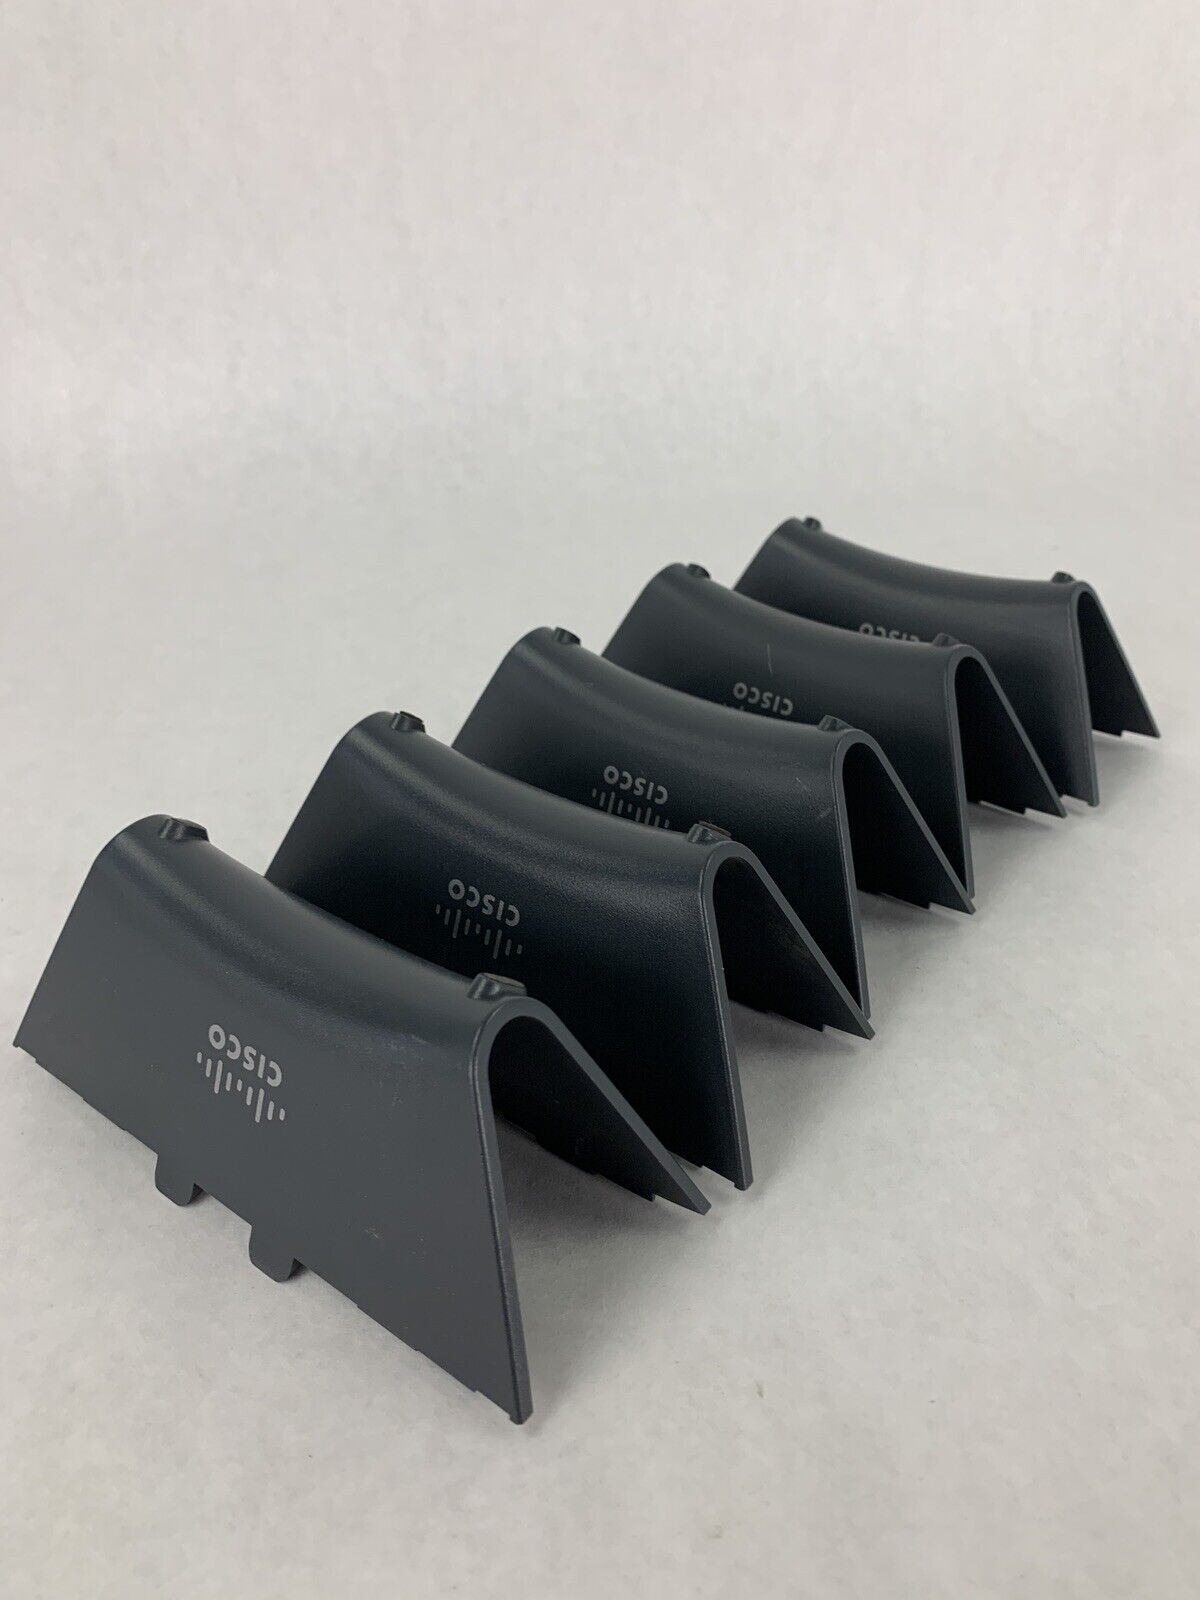 Lot of 5 Cisco Systems 7905 7906 7911 7912 IP Telephone Foot Stand Base Gray